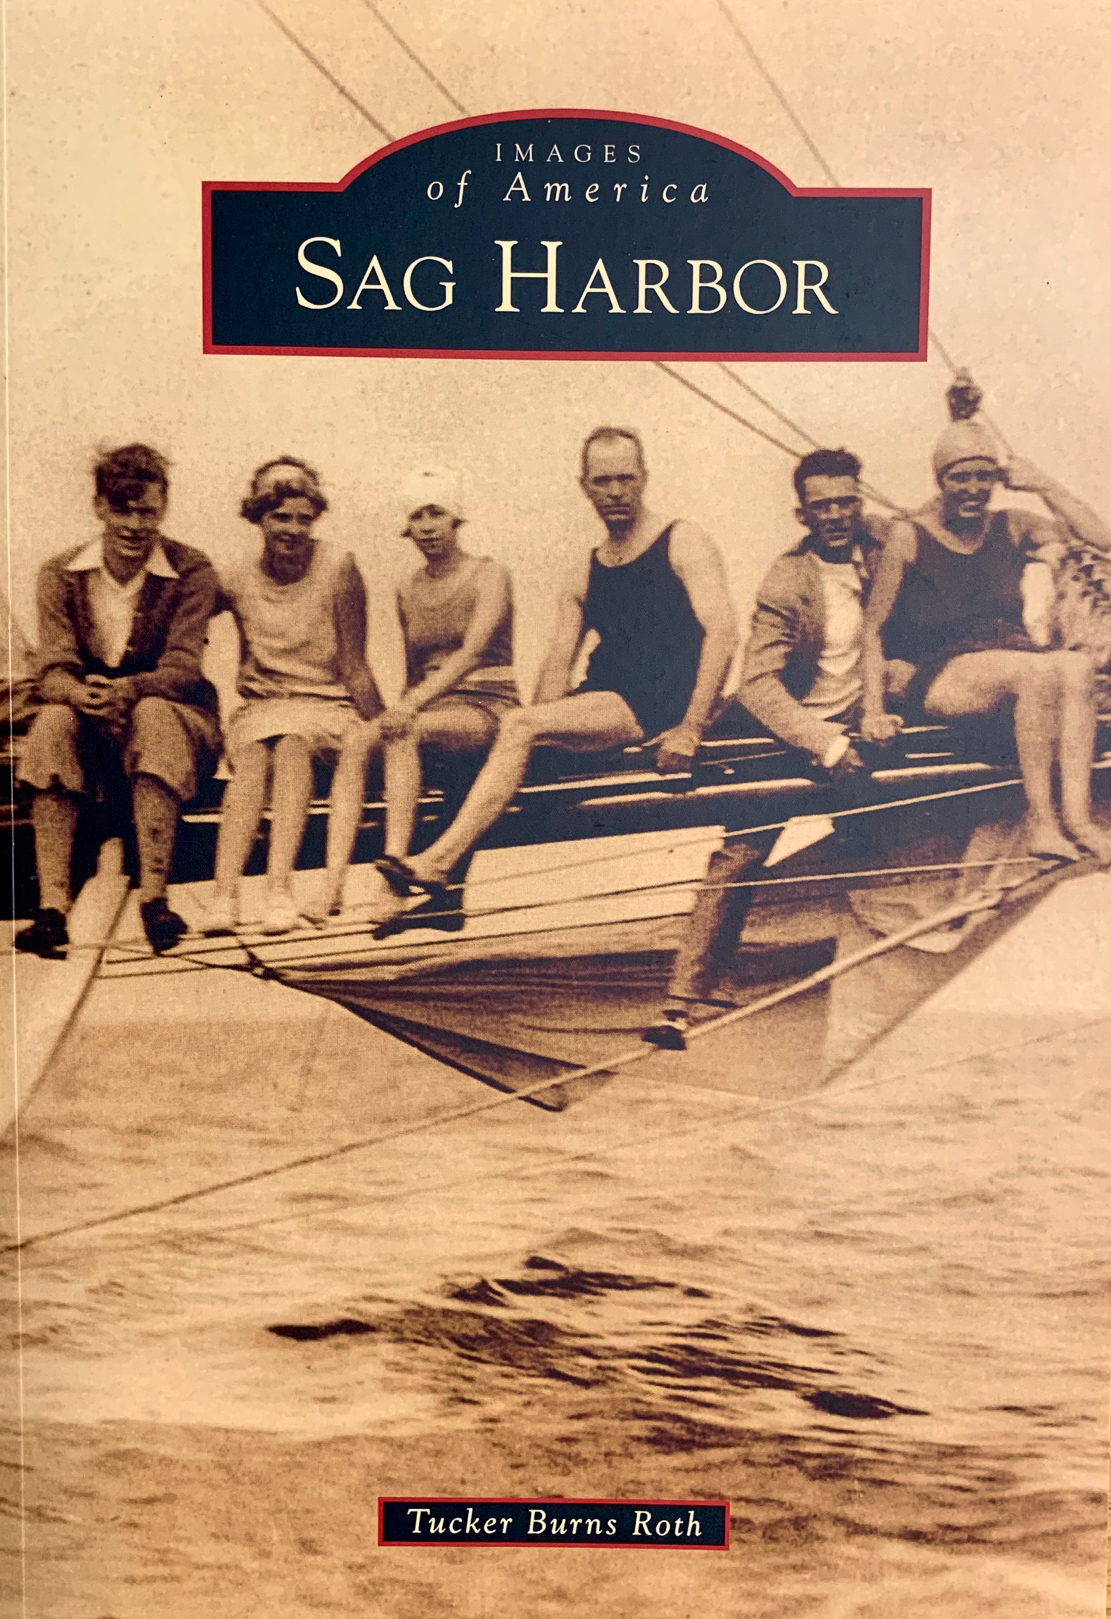 Images of America Sag Harbor by Tucker Burns Roth